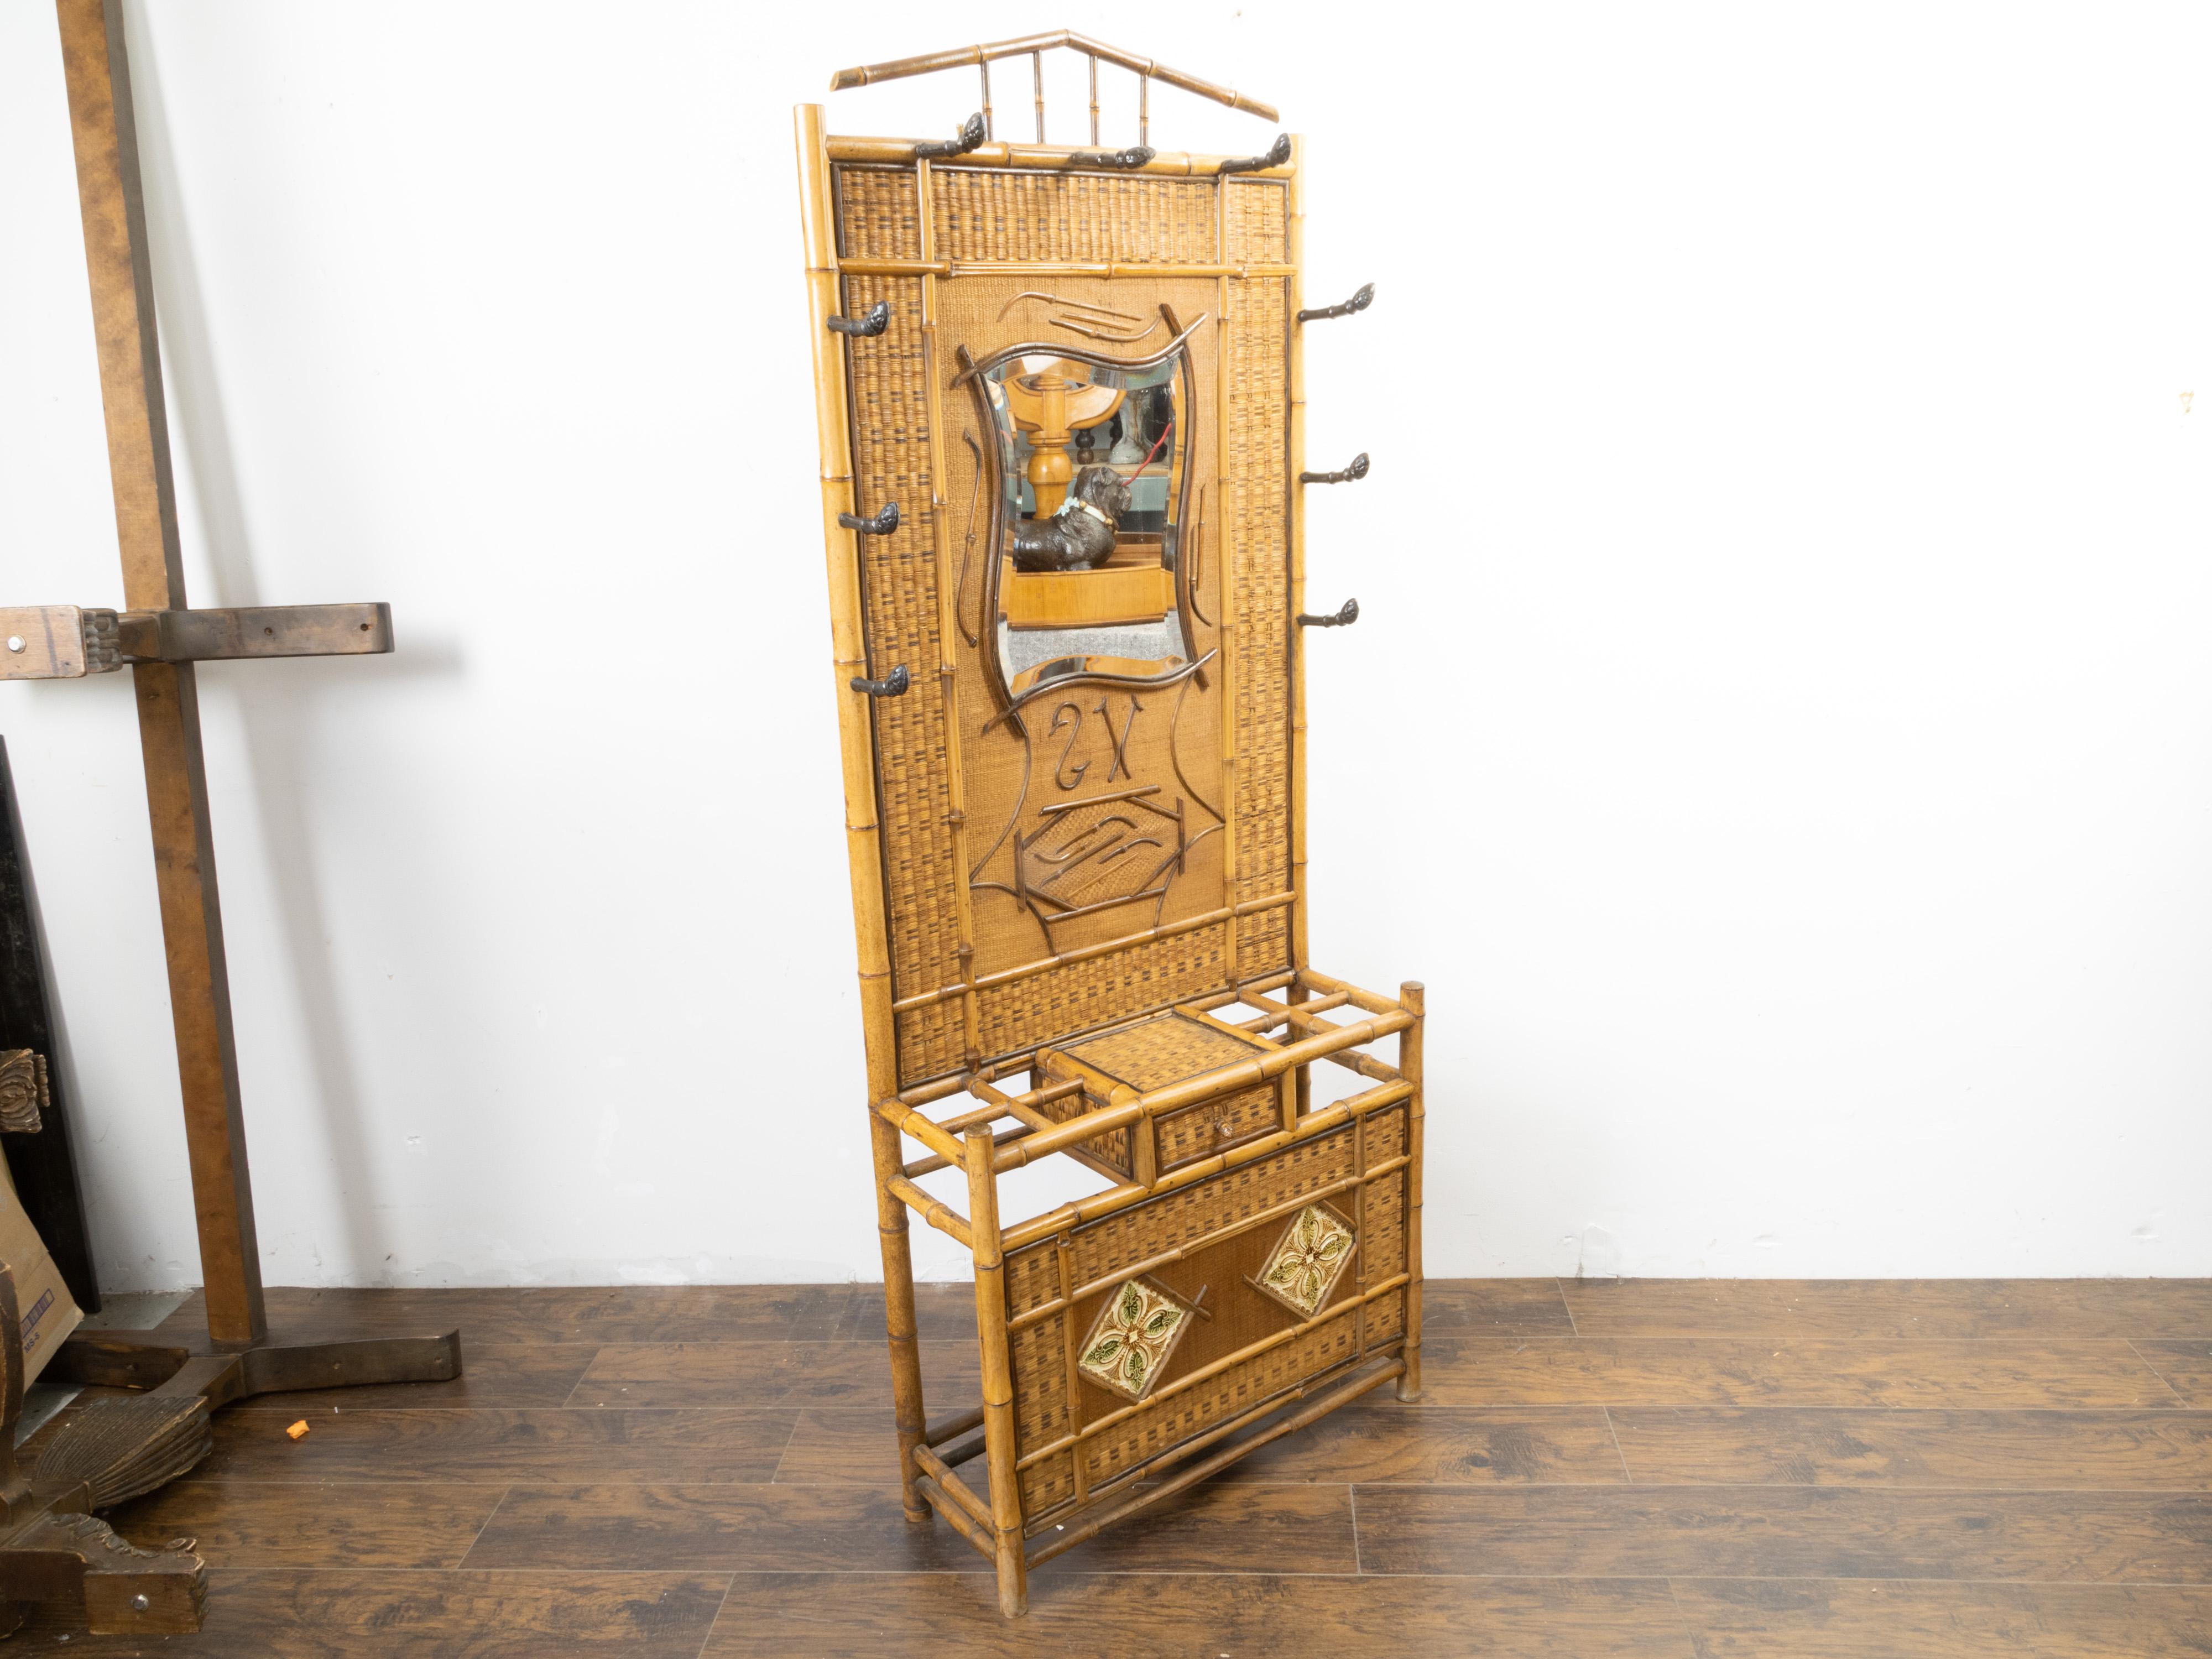 An English bamboo and rattan hat rack from the late 19th century, with mirror and tiles. Created in England during the last quarter of the 19th century, this freestanding hat rack features a bamboo and rattan structure securing a mirror with wavy